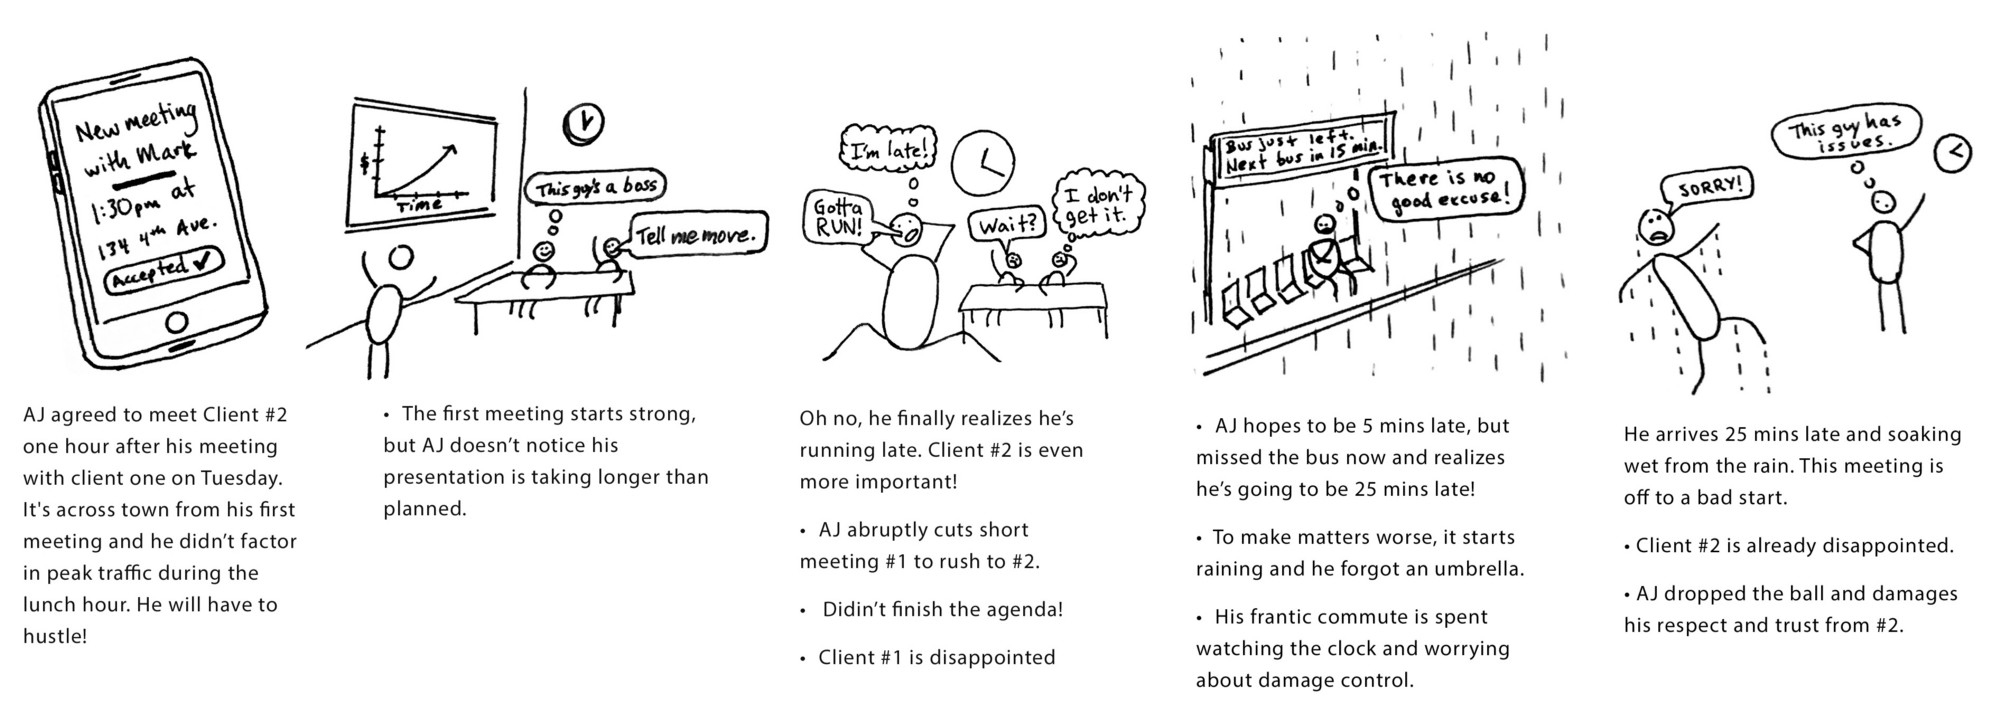 story-board one shows a fail scenario where a sales person is unprepared for rainy weather and transportation delays. They end up very rushed and jeopordize two sales opportunities scheduled back to back.